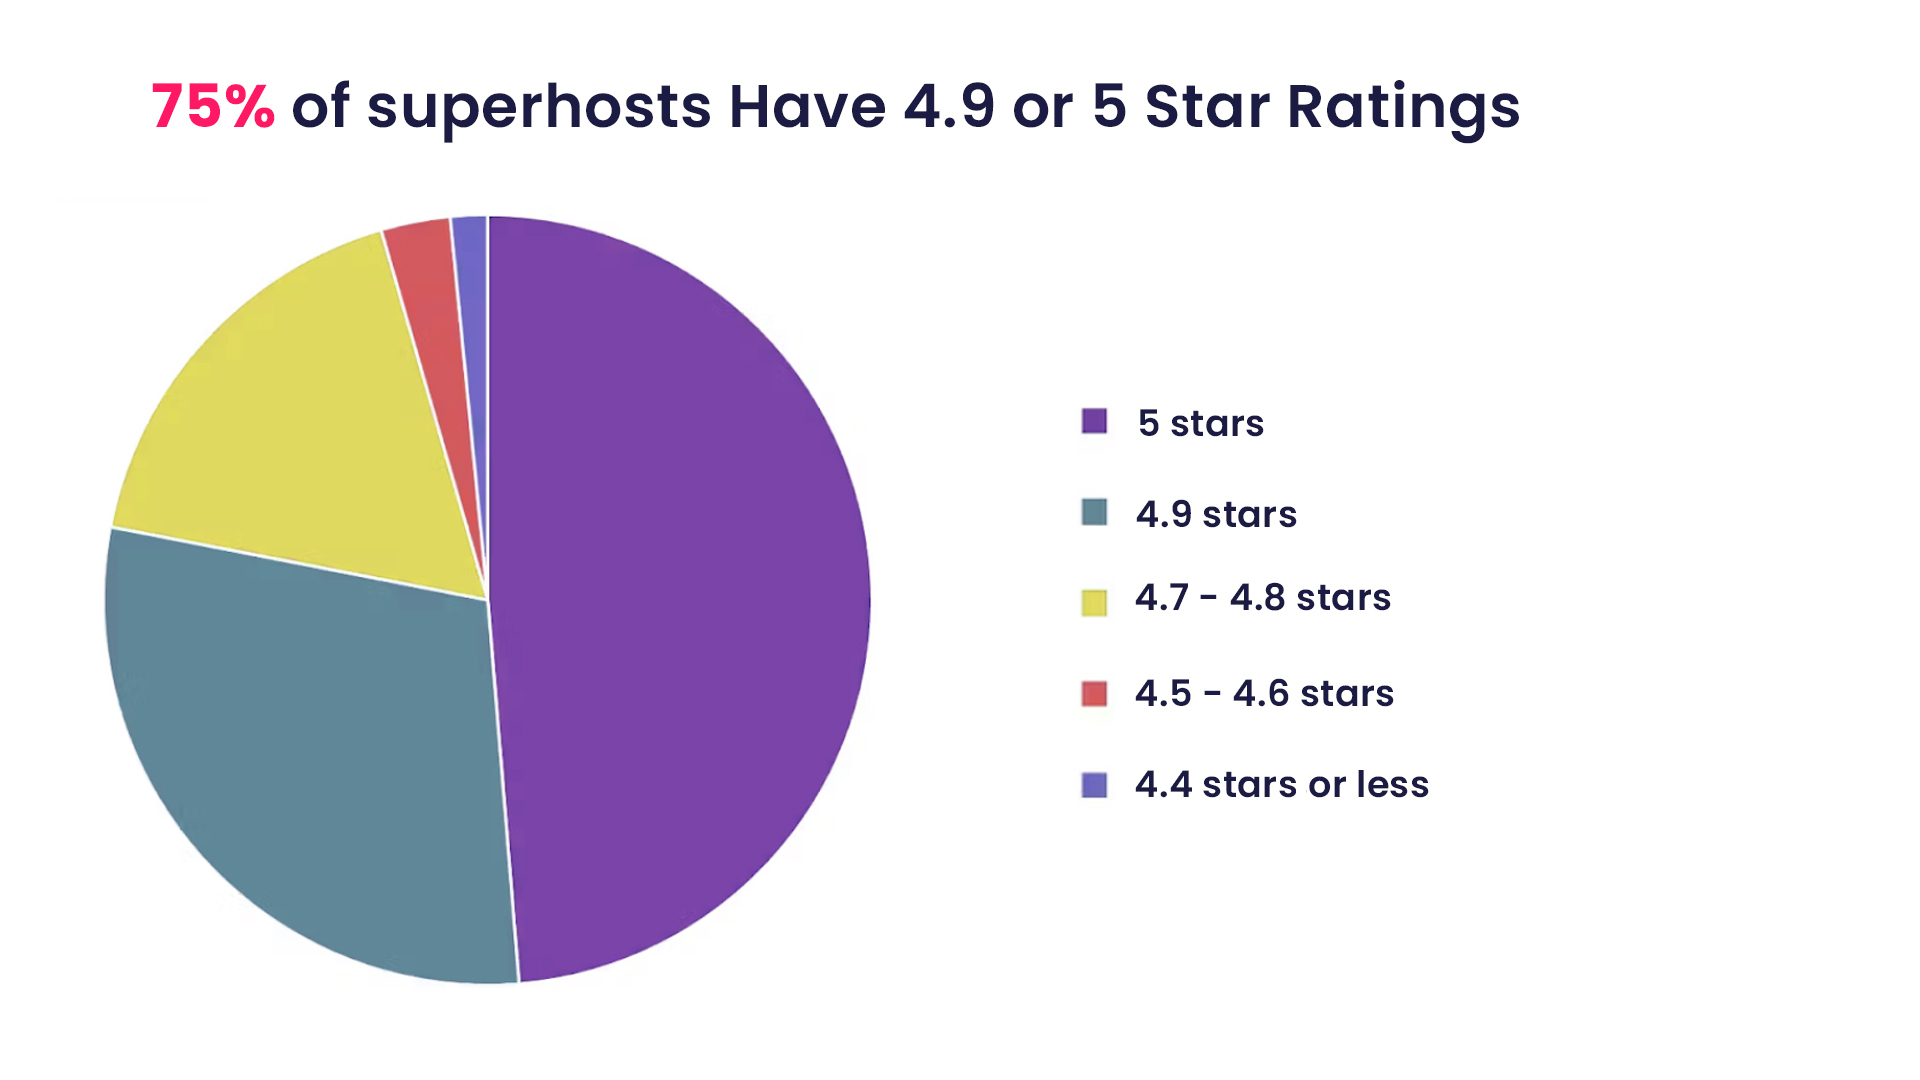 Pie chart illustrating the distribution of star ratings among Airbnb Superhosts. The chart shows that 75% of superhosts have ratings of either 4.9 or 5 stars. It includes segments for 5 stars, 4.9 stars, 4.7-4.8 stars, 4.5-4.6 stars, and 4.4 stars or less, each in different colors.